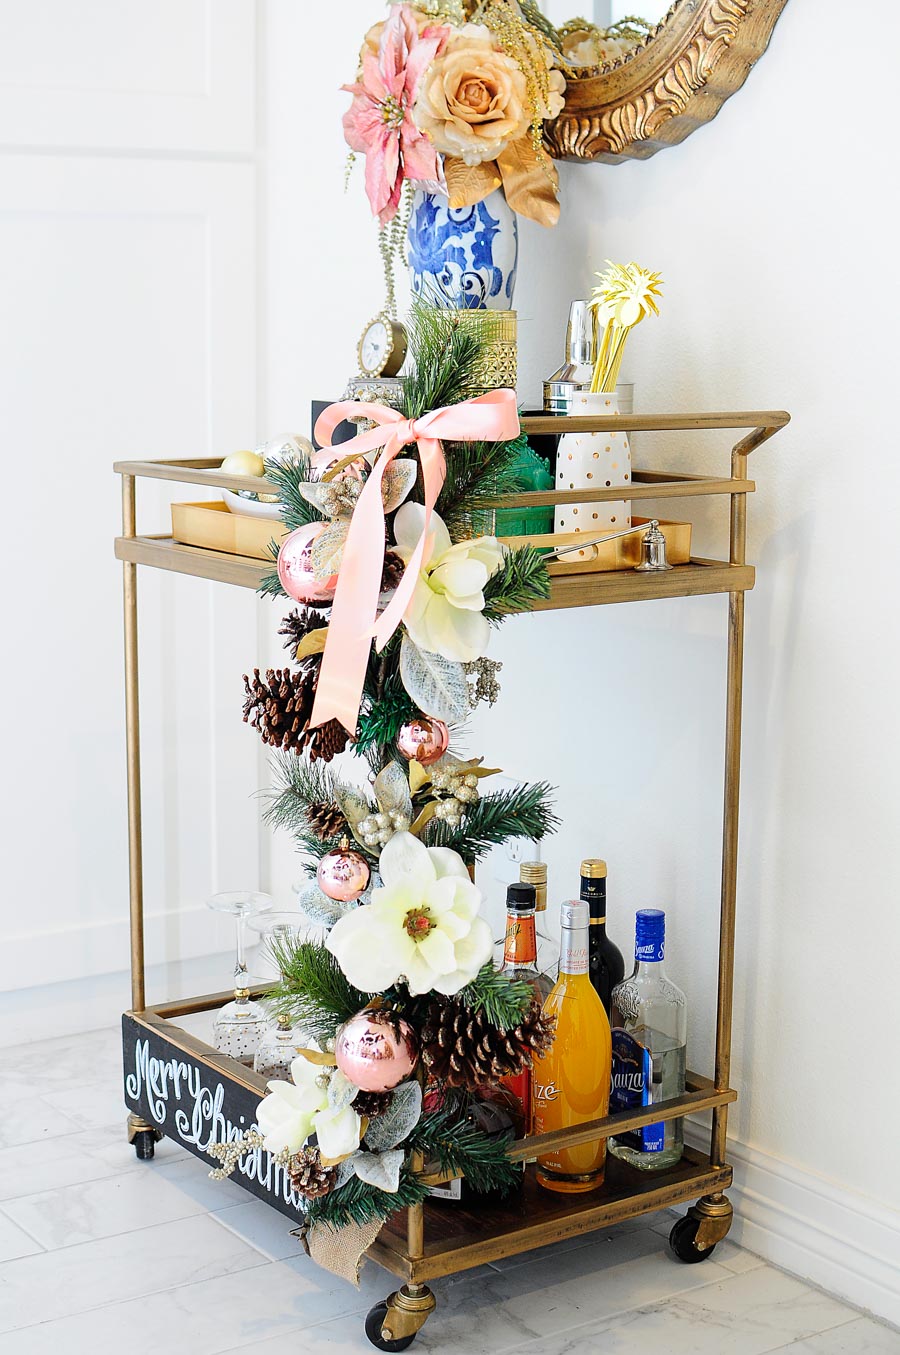 A gorgeous, eclectic bar cart decorated with blush, silver, gold and white accents, a ginger jar vase, foo dog and more. The gold mirror above the cart is perfection.